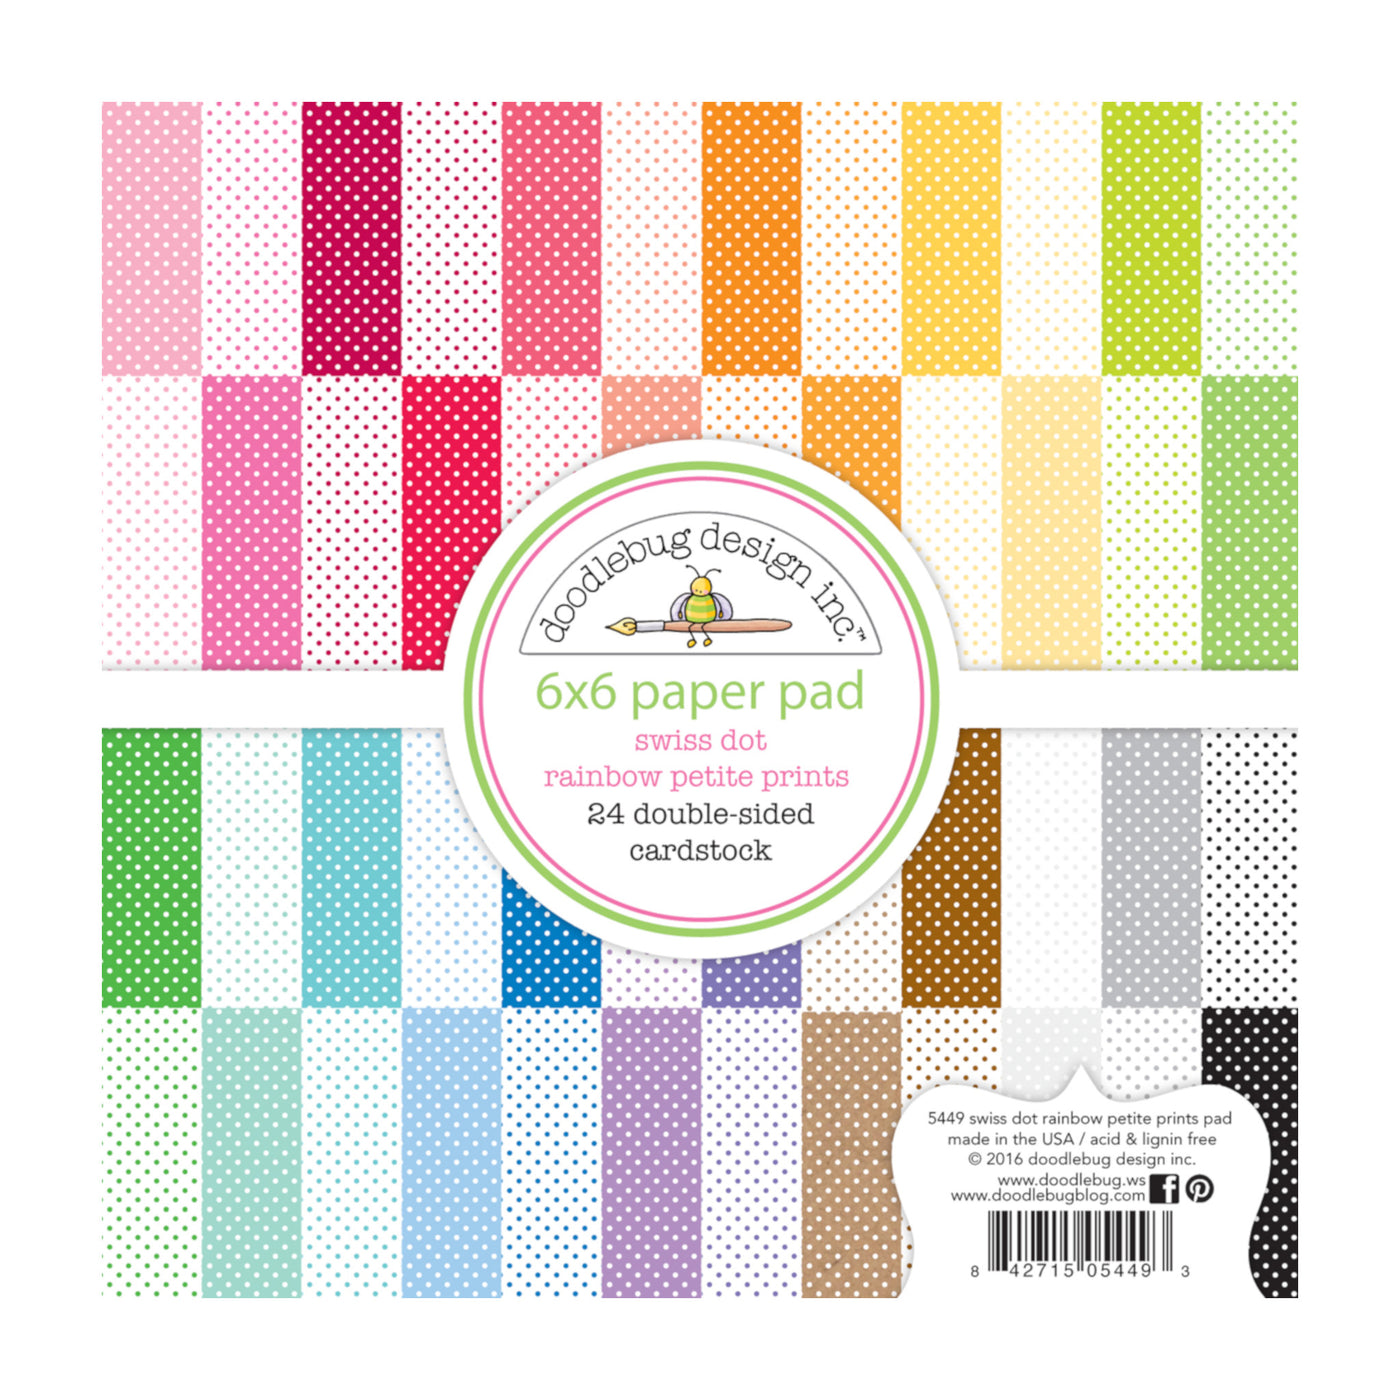 SWISS DOT Petite Prints Collection - 6x6 Pad with 24 double-sided pages from Doodlebug Design